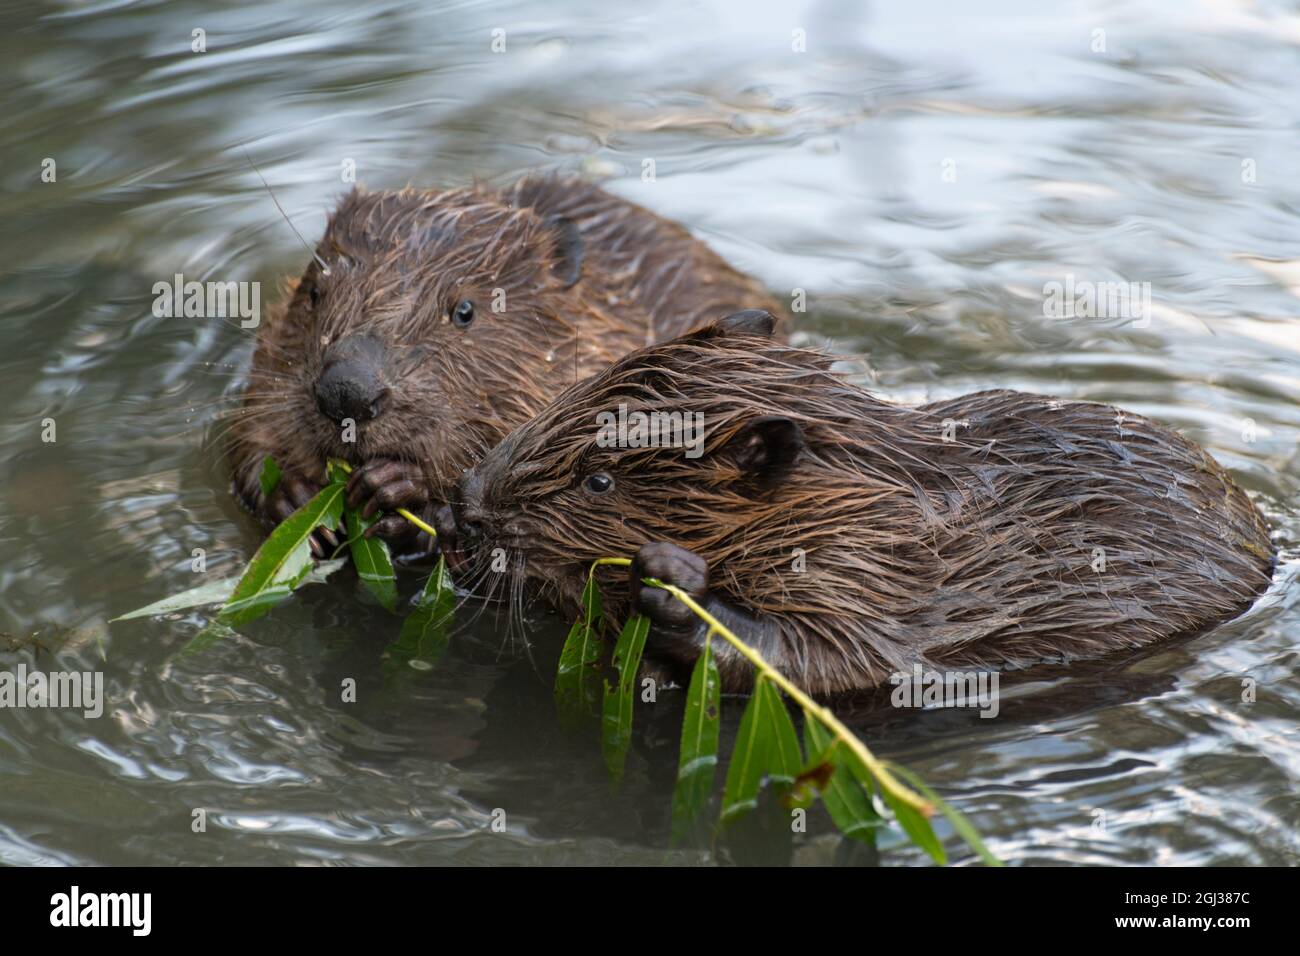 Young beavers are eating a willow twig, Moscow, Russia Stock Photo